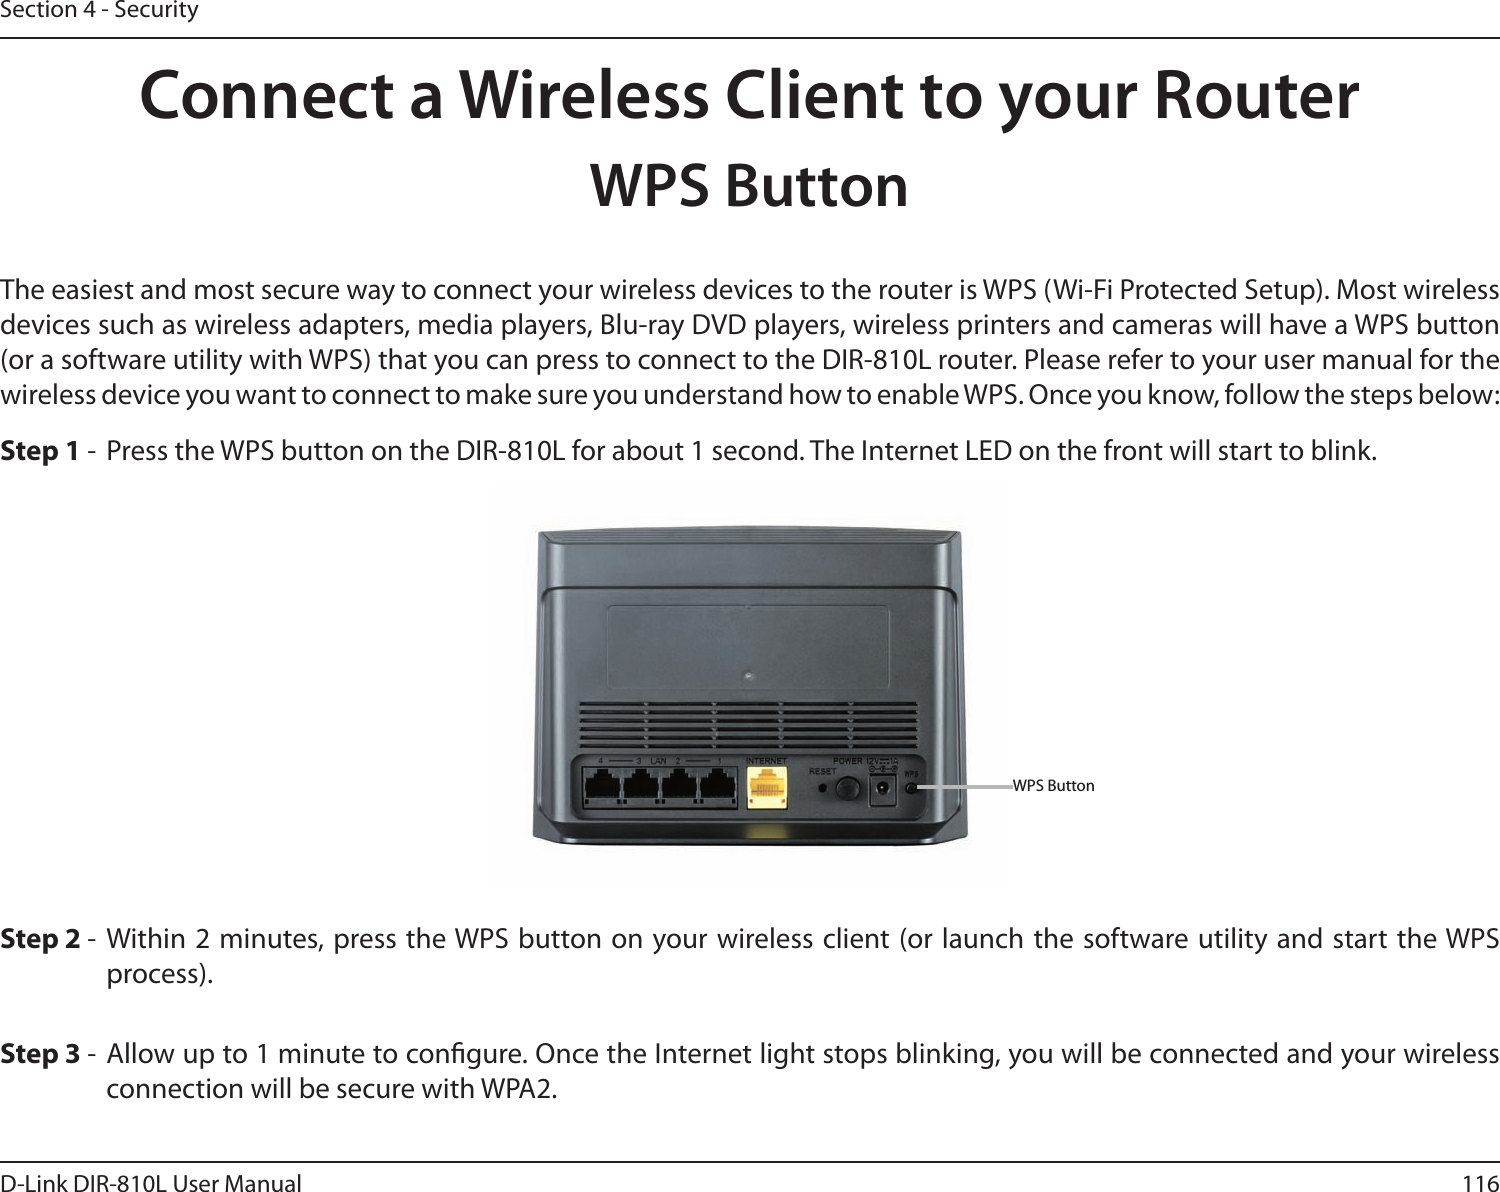 116D-Link DIR-810L User ManualSection 4 - SecurityConnect a Wireless Client to your RouterWPS ButtonStep 2 -  Within 2 minutes, press the WPS button on your wireless client (or launch the software utility and start the WPS process).The easiest and most secure way to connect your wireless devices to the router is WPS (Wi-Fi Protected Setup). Most wireless devices such as wireless adapters, media players, Blu-ray DVD players, wireless printers and cameras will have a WPS button (or a software utility with WPS) that you can press to connect to the DIR-810L router. Please refer to your user manual for the wireless device you want to connect to make sure you understand how to enable WPS. Once you know, follow the steps below:Step 1 -  Press the WPS button on the DIR-810L for about 1 second. The Internet LED on the front will start to blink.Step 3 -  Allow up to 1 minute to congure. Once the Internet light stops blinking, you will be connected and your wireless connection will be secure with WPA2.WPS Button